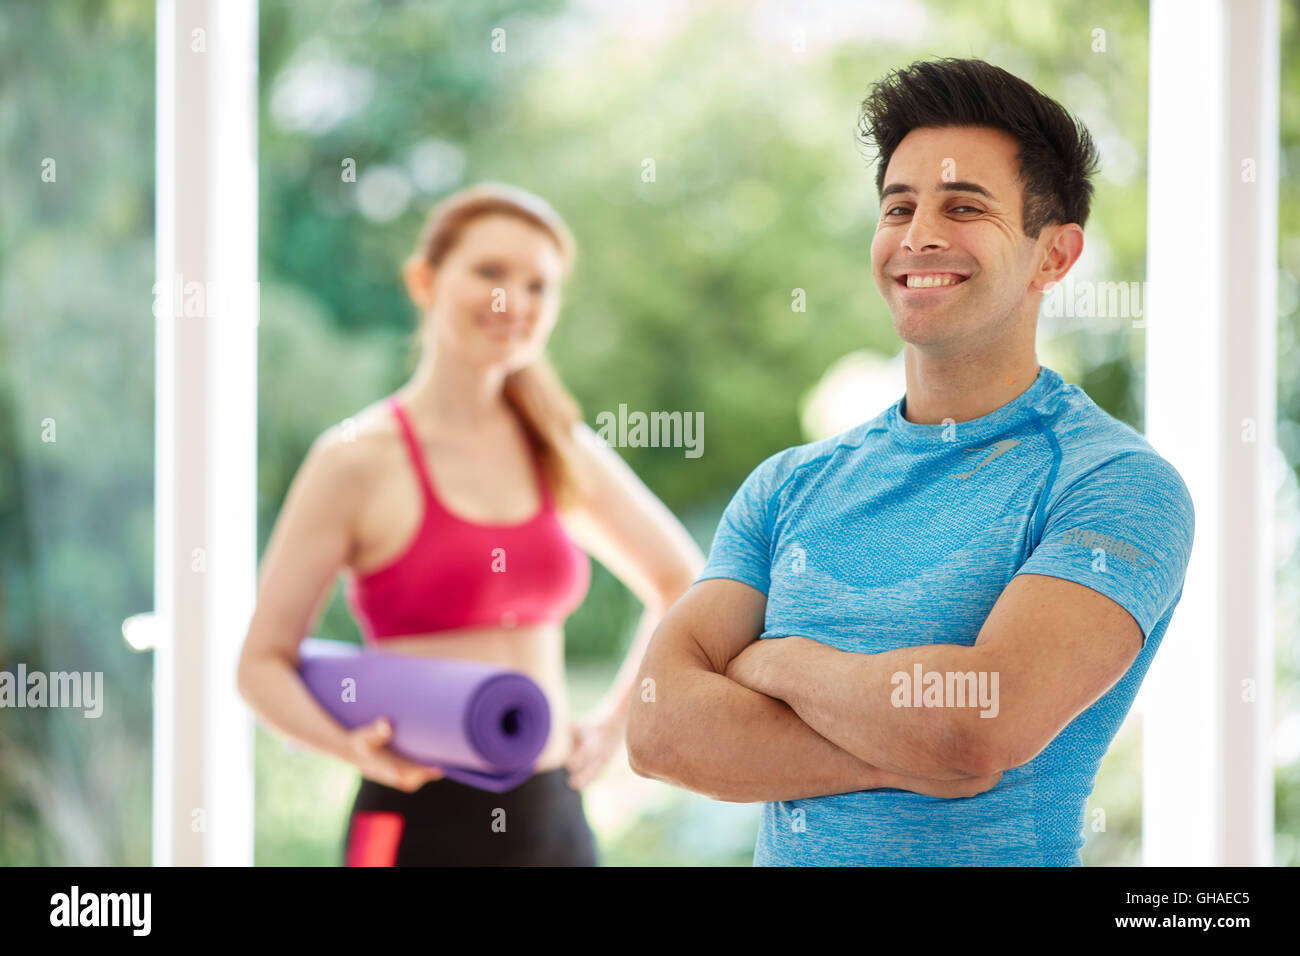 Couple stood together in gym Stock Photo